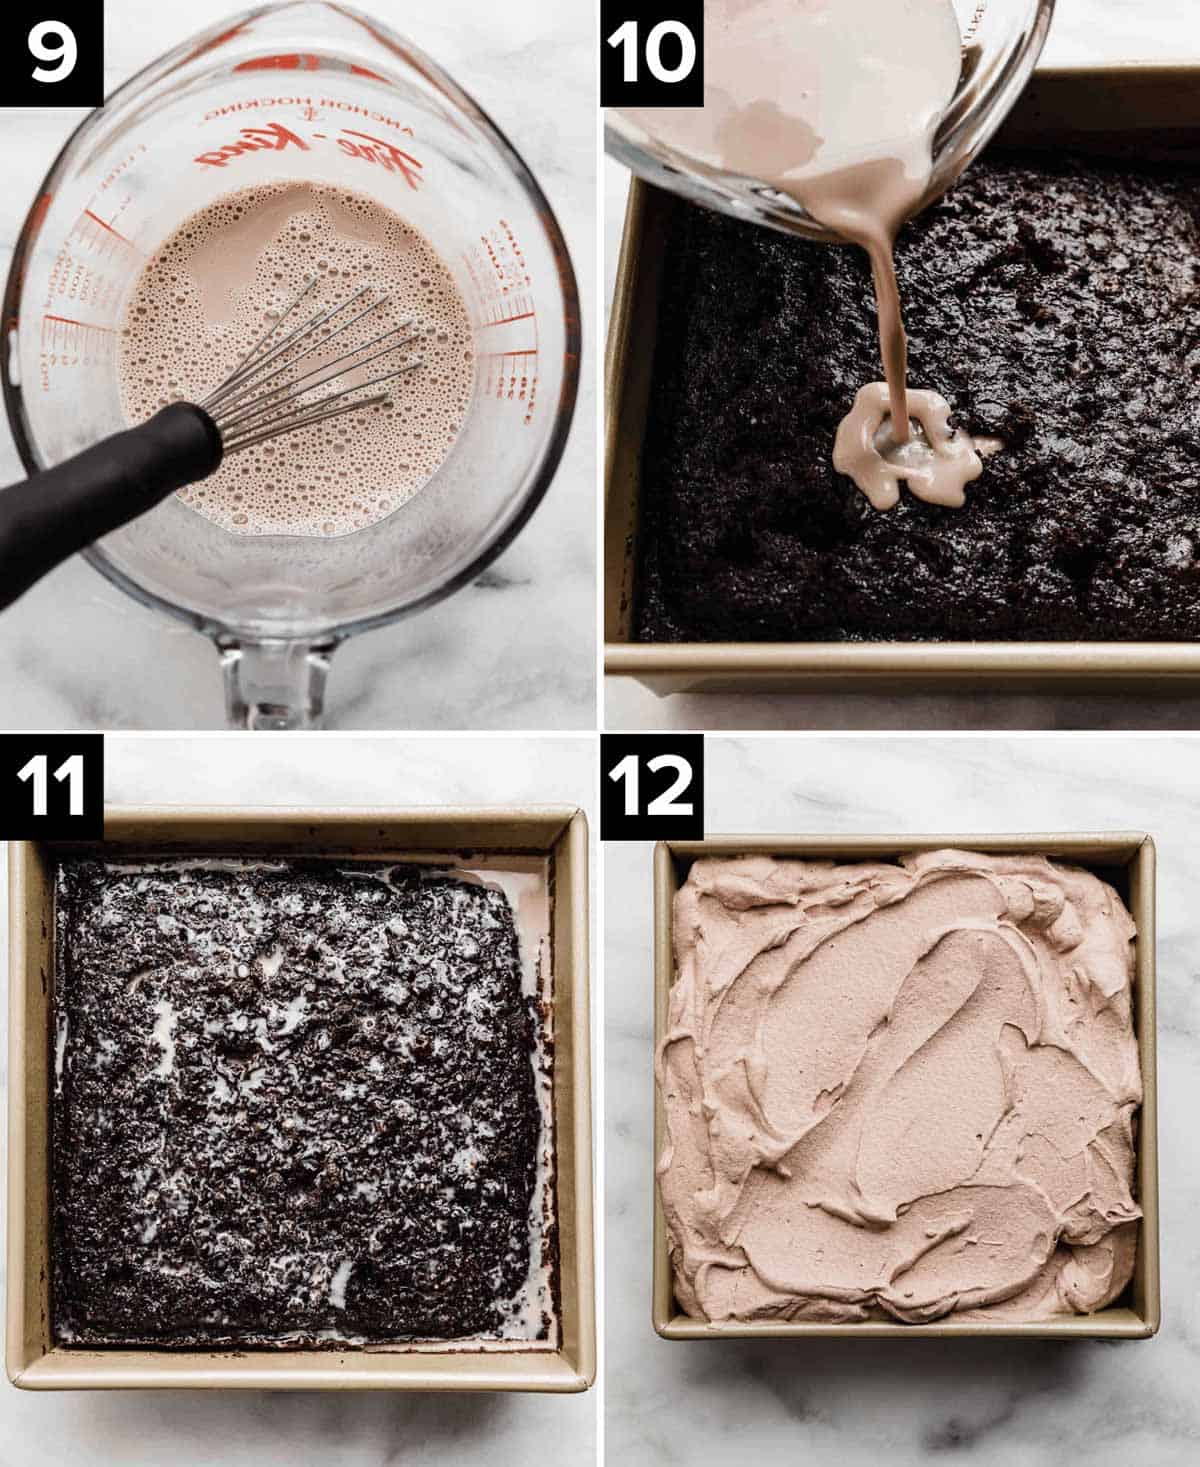 Four images showing the process of how to make Chocolate Tres Leches Cake, top left photo is light brown liquid in measuring cup, top right the liquid mixture is being poured over chocolate cake, bottom left is 3 milk chocolate cake in square pan, bottom right photo is chocolate whipped cream topped Chocolate Tres Leches Cake.